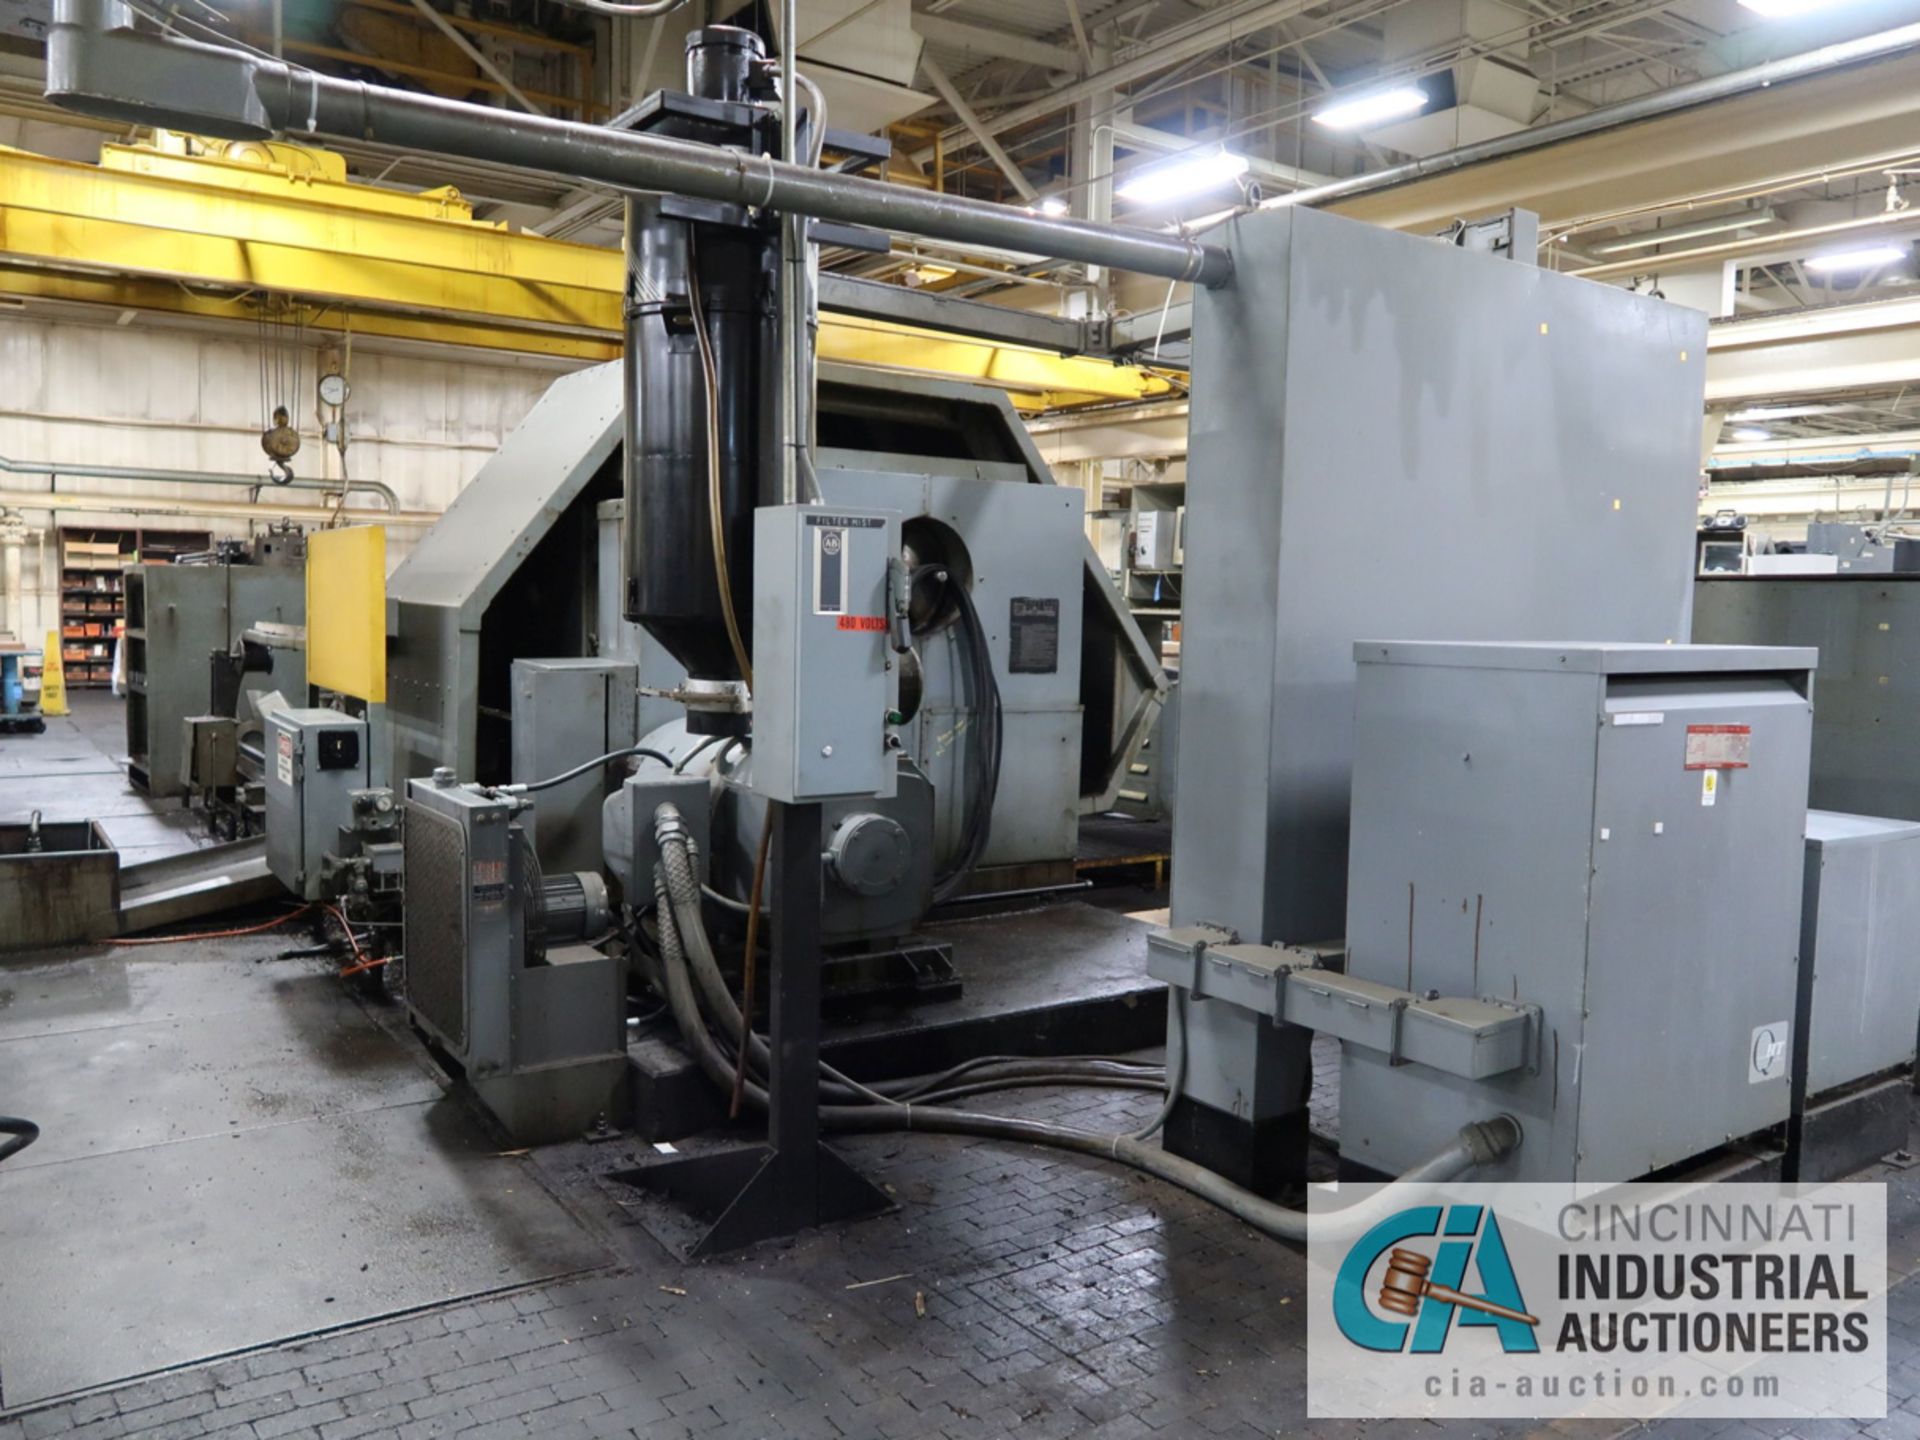 48” X 108” LEBLOND 15” HOLLOW SPINDLE MODEL 5029 N/C FLAT BED LATHE; GE 1050 CONTROL, 32” CHUCK, - Image 3 of 22